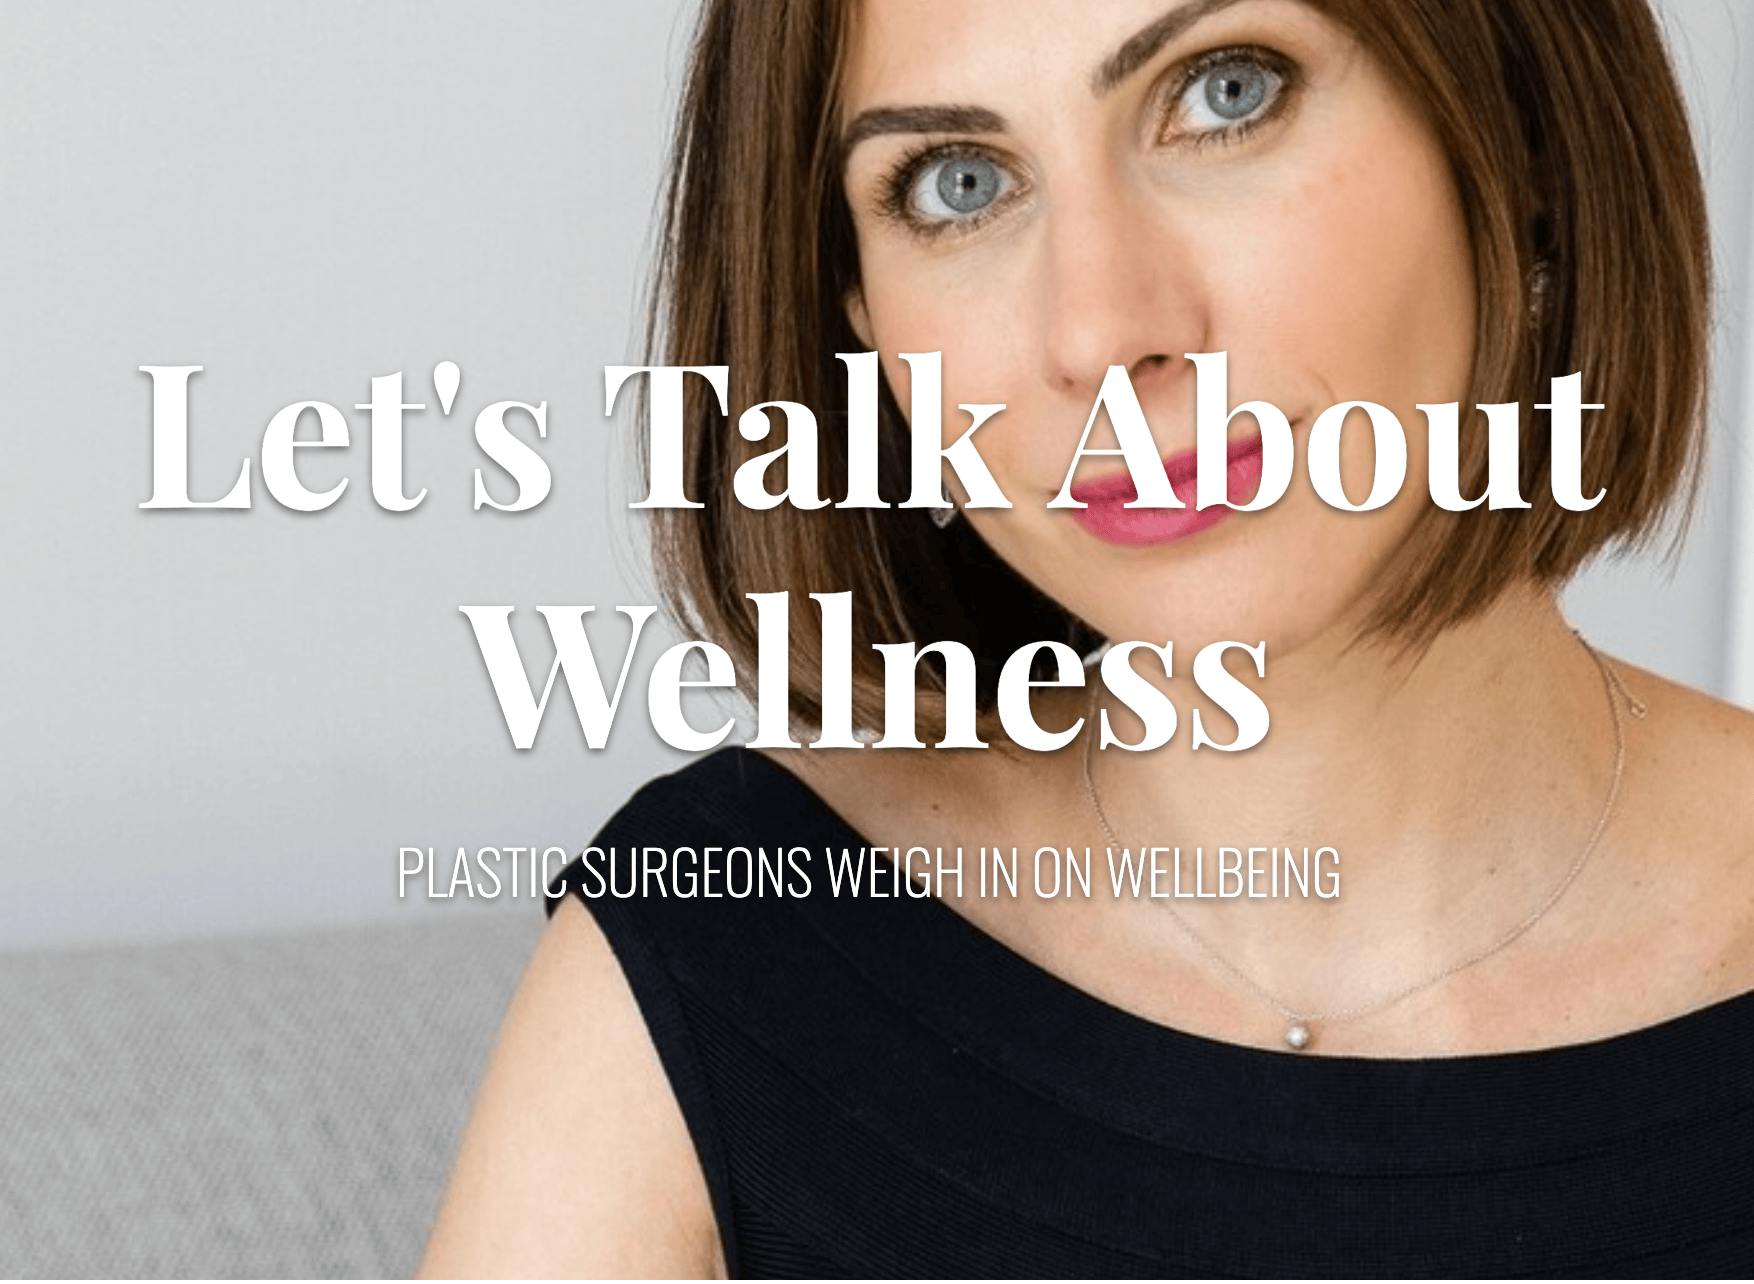 Let's Talk About Wellness